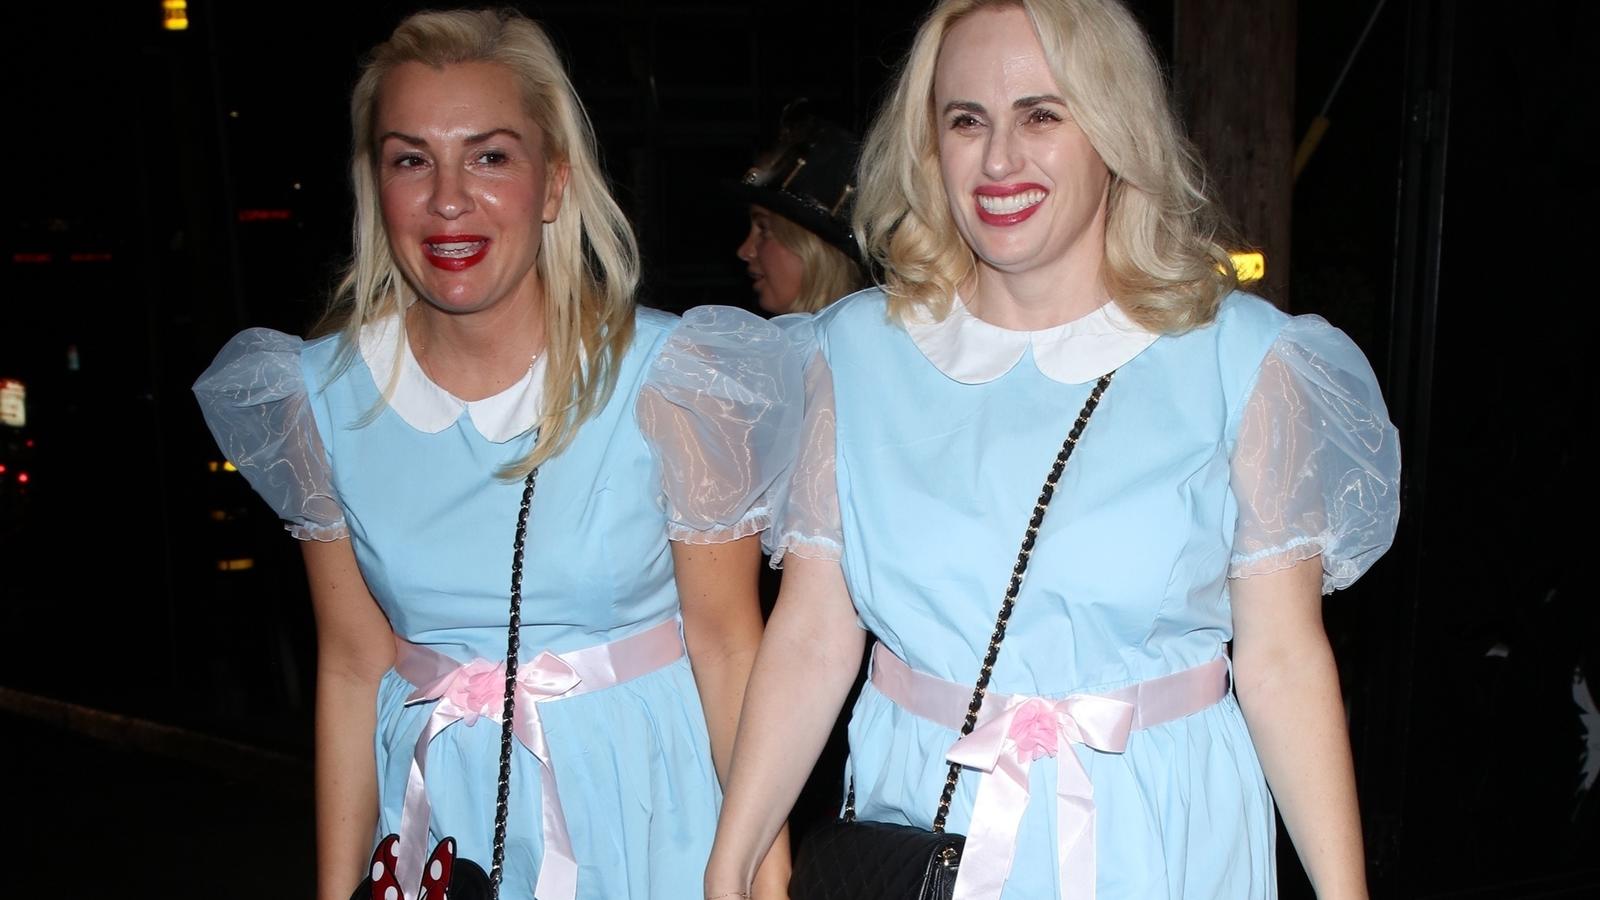 West Hollywood, CA - Rebel Wilson and girlfriend Ramona Agruma look smitten as they hold hands on their way to Halloween party in LA while dressed up as the creepy twins from The Shining.Pictured: Ramona Agruma, Rebel WilsonBACKGRID USA 30 OCTOBER 20